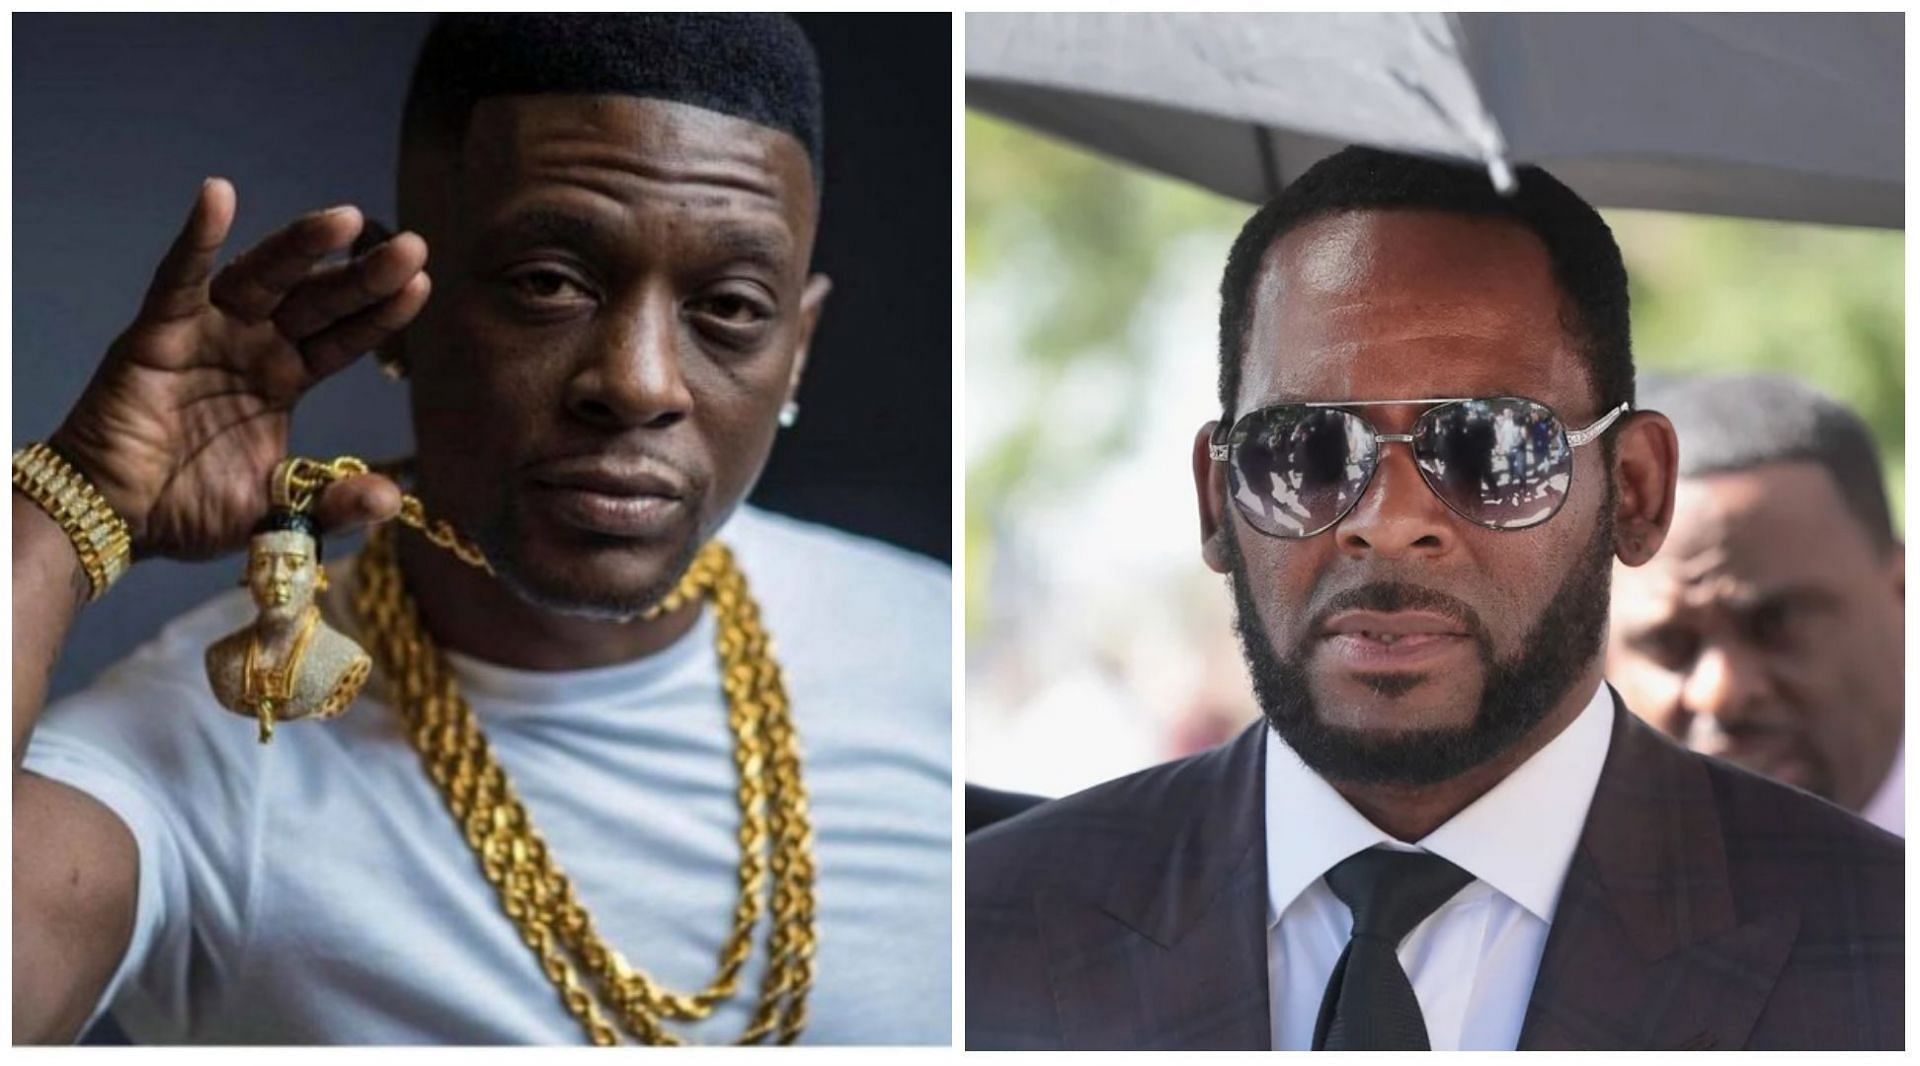 Louisiana rapper Boosie Badazz defended R. Kelly in an animated rant recently (Images via Twitter @boosiebadazz)